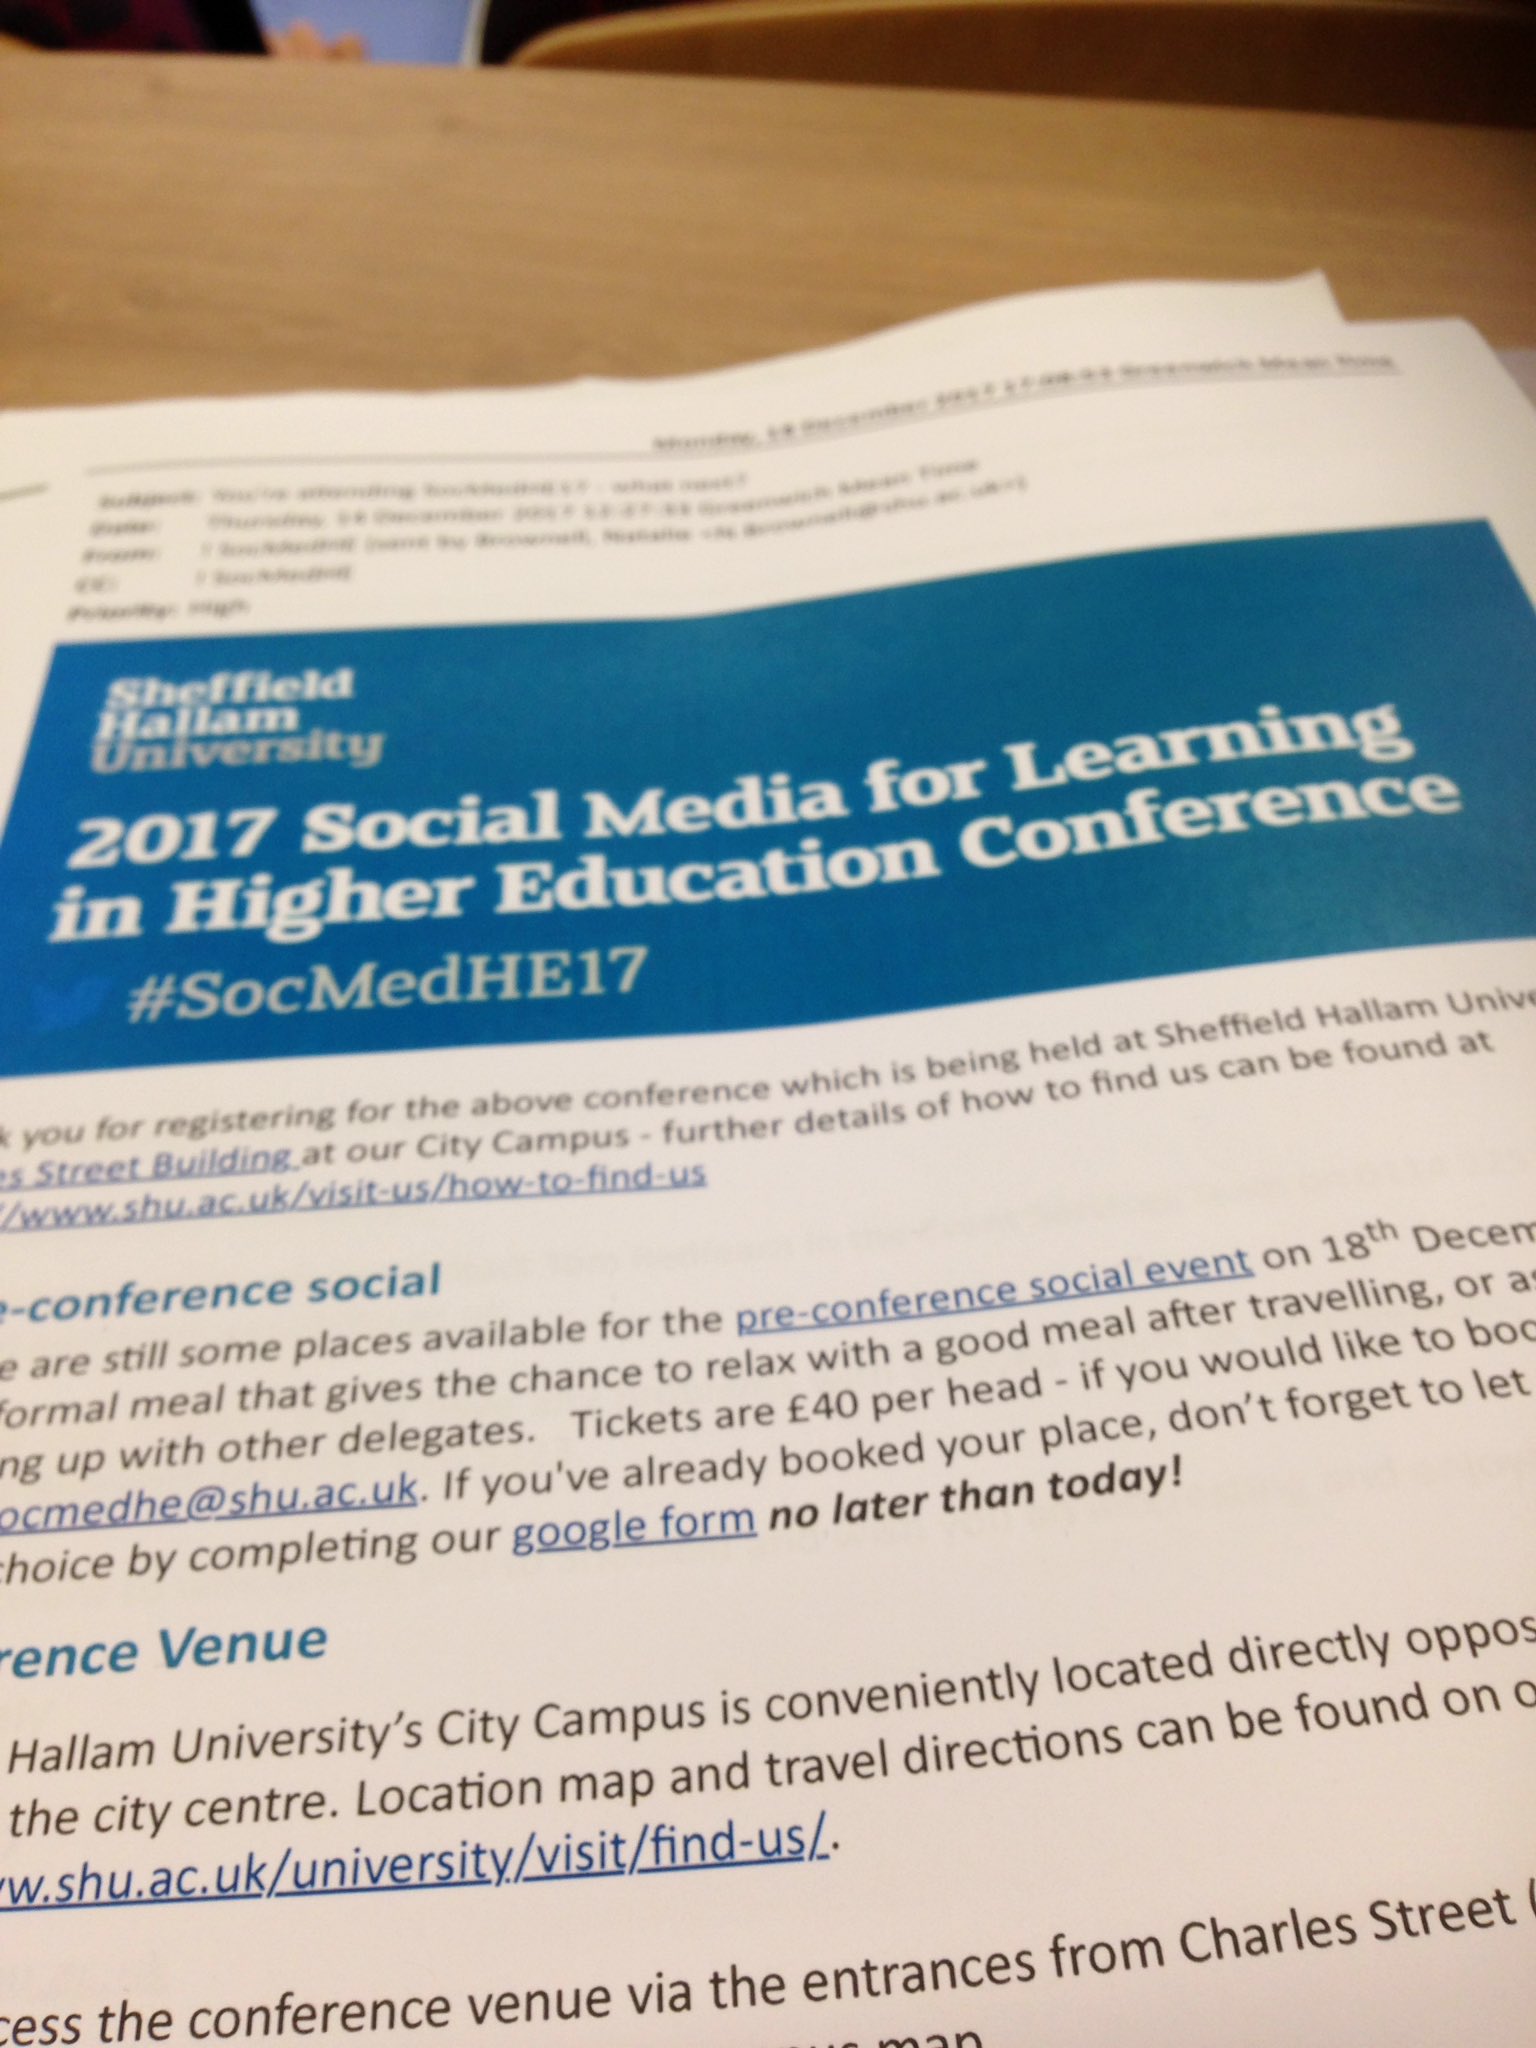 First time at #SocMedHE17 -lots of energy and chat. Looking forward to opportunities for shared practice and learning new info. https://t.co/l28JgrMq9H